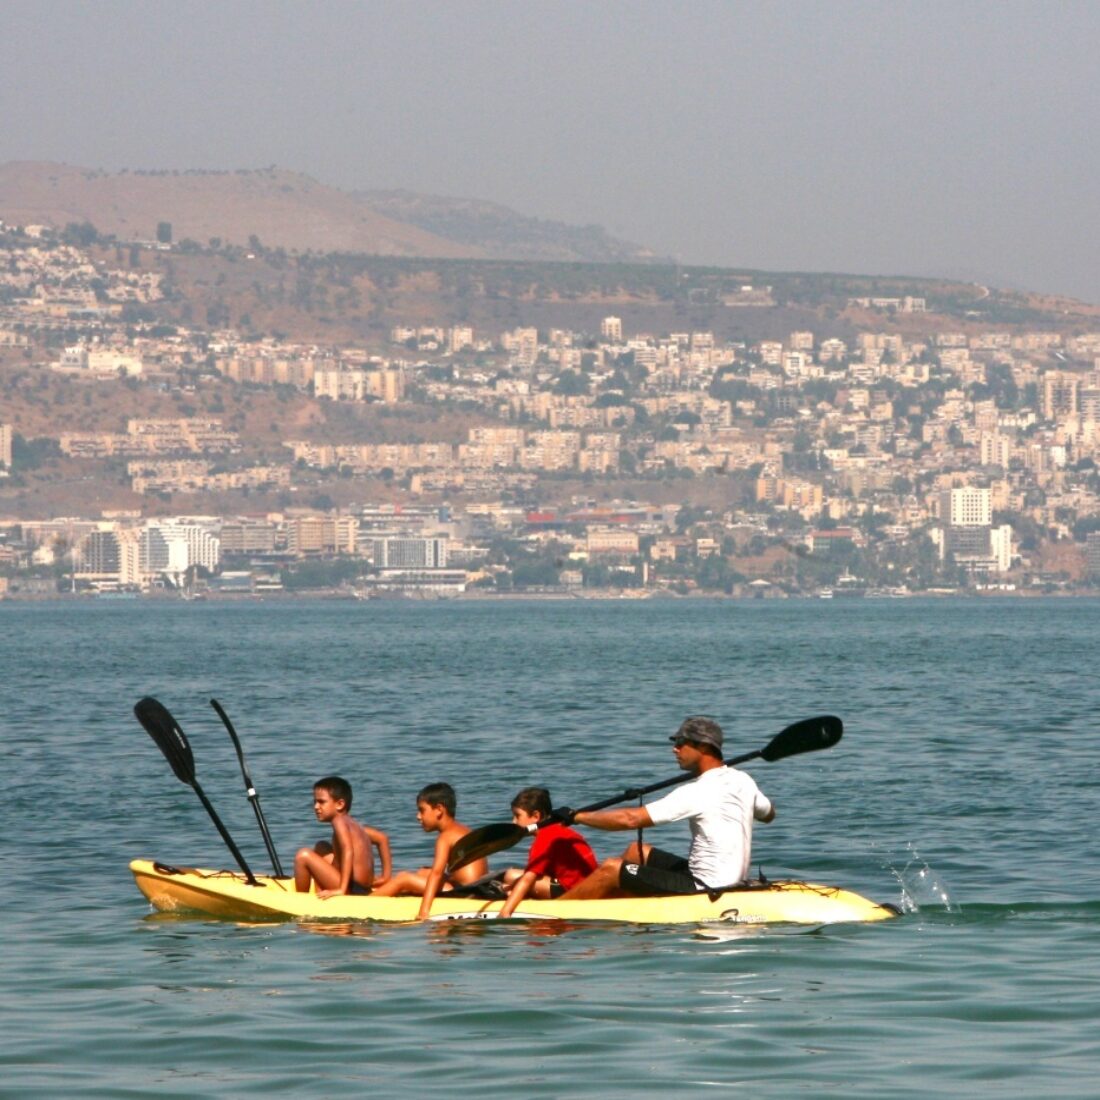 Children kayaking in the Sea of Galilee. Photo by Chen Leopold/FLASH90